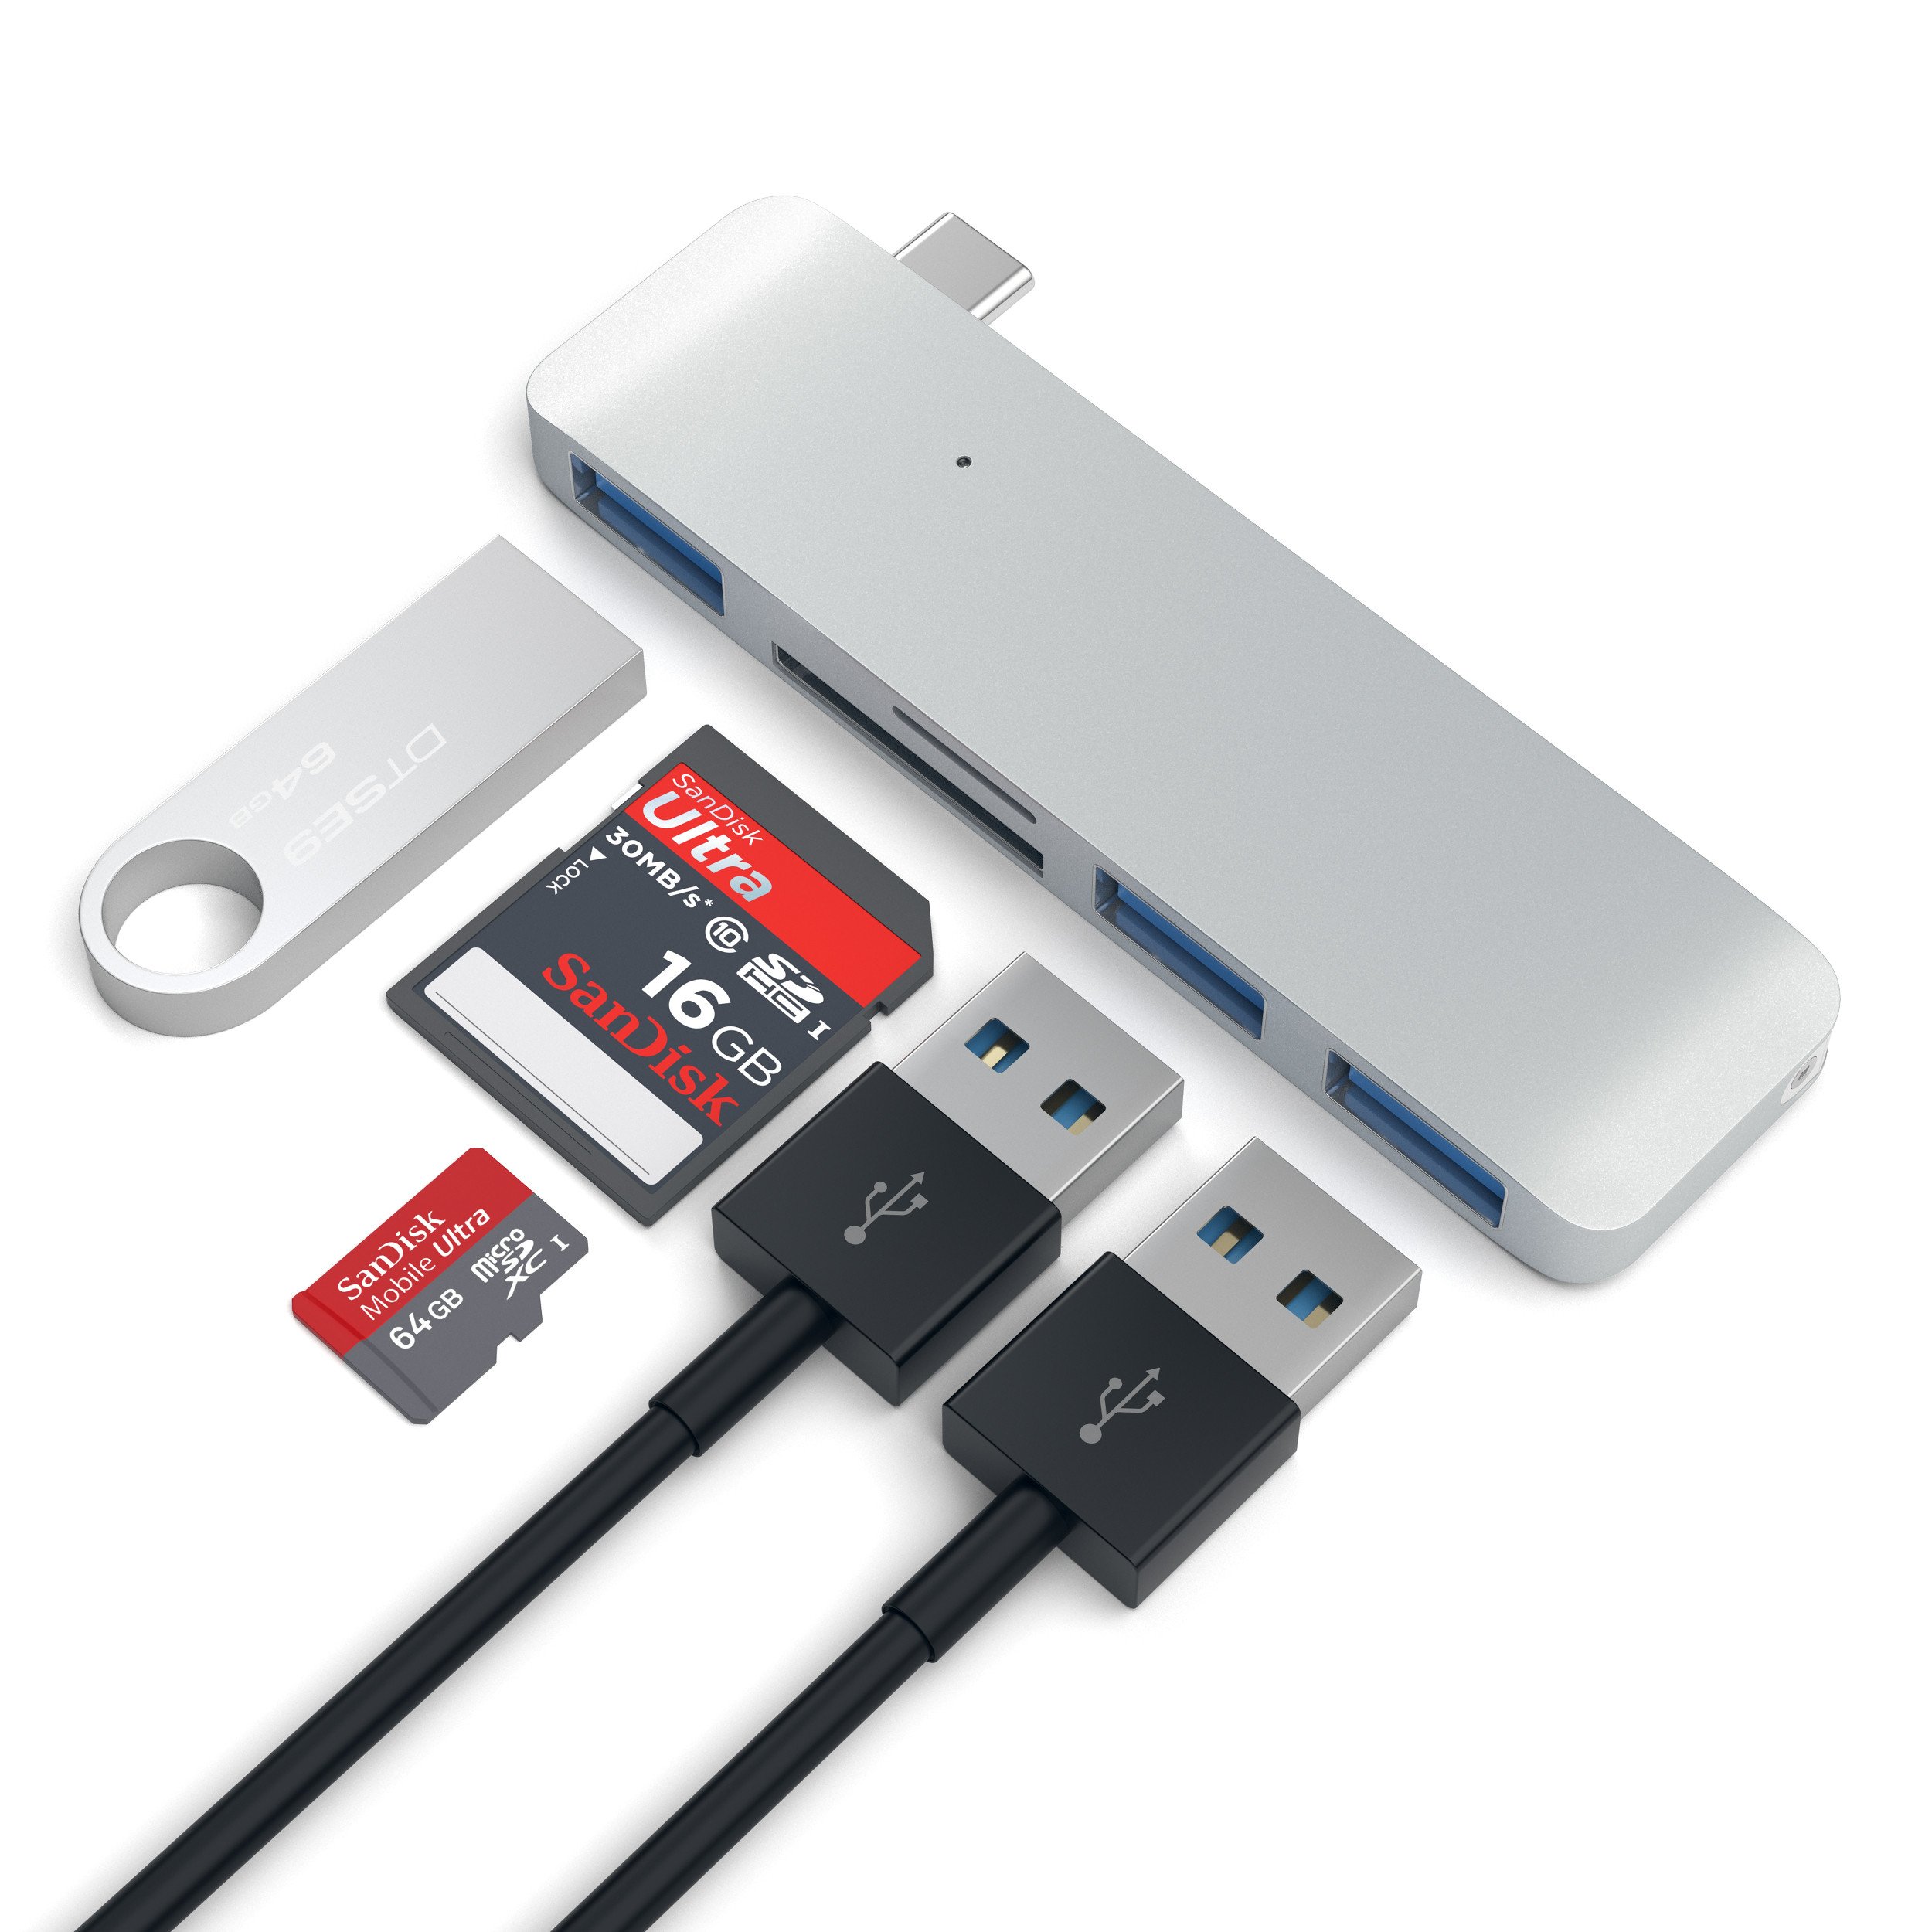 Satechi Type-C USB 3.0 3-in-1 Combo Hub Silver (ST-TCUHS)